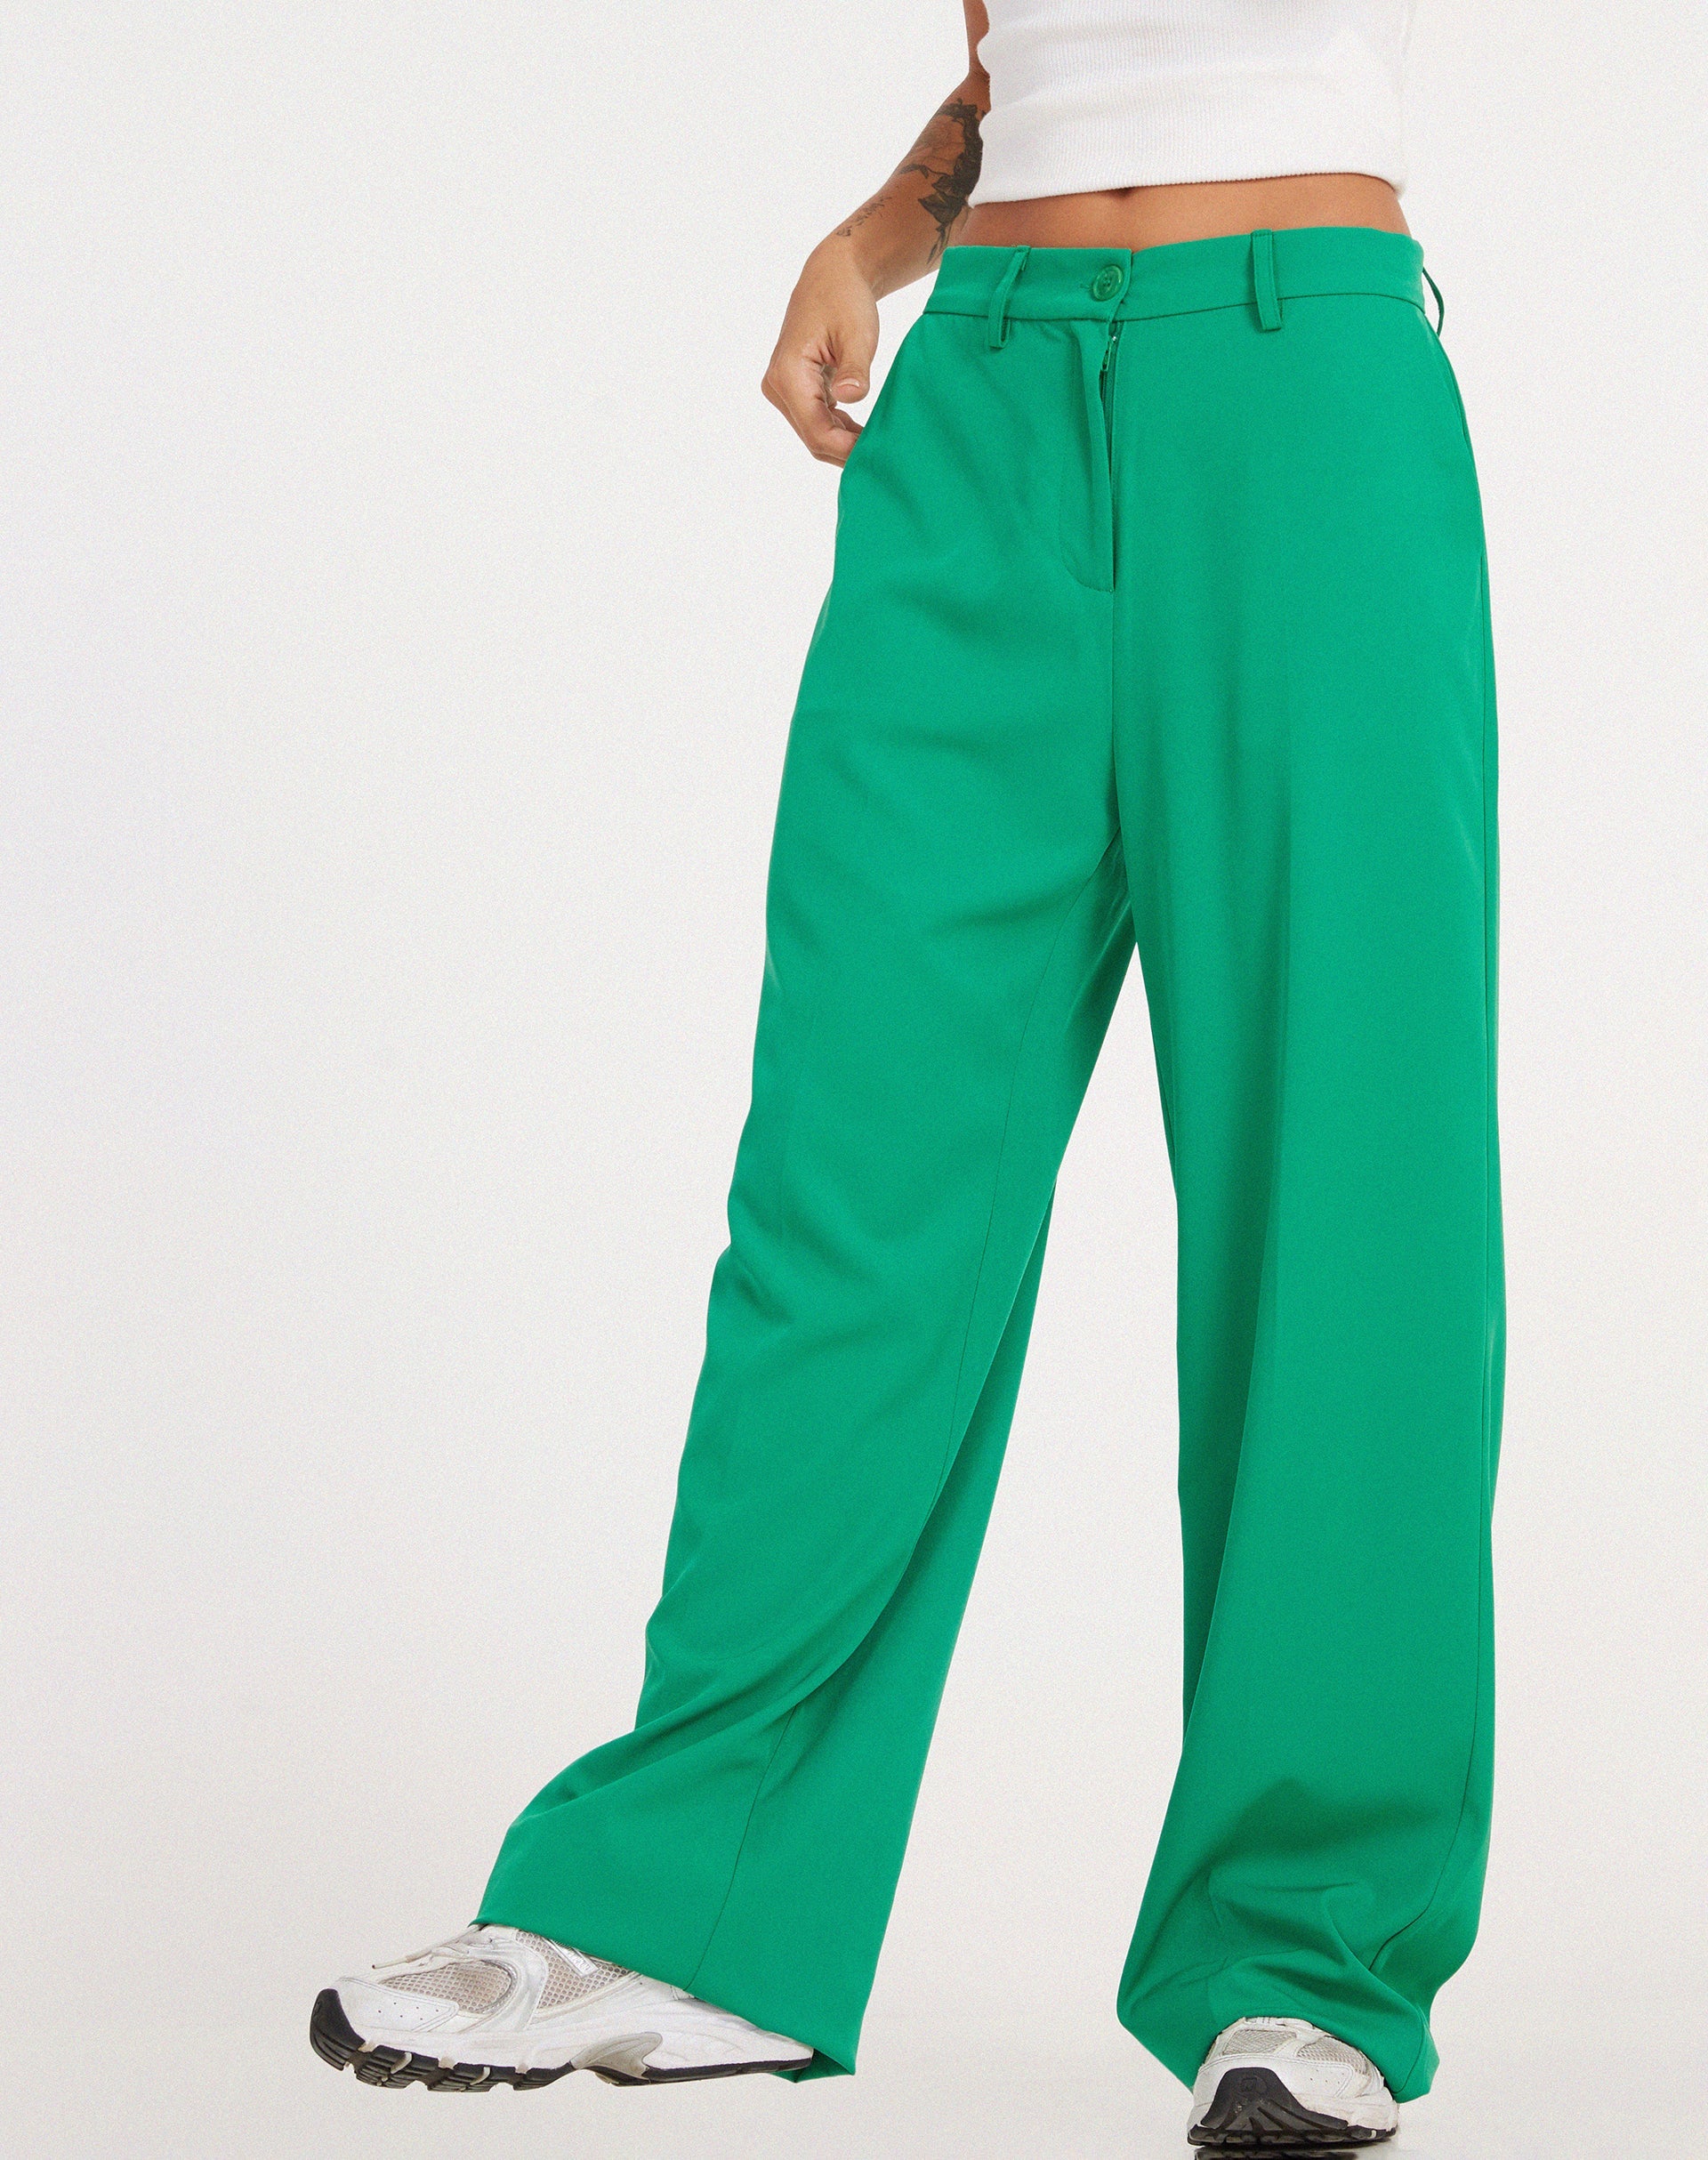 image of Abba Trouser in Tailoring Green